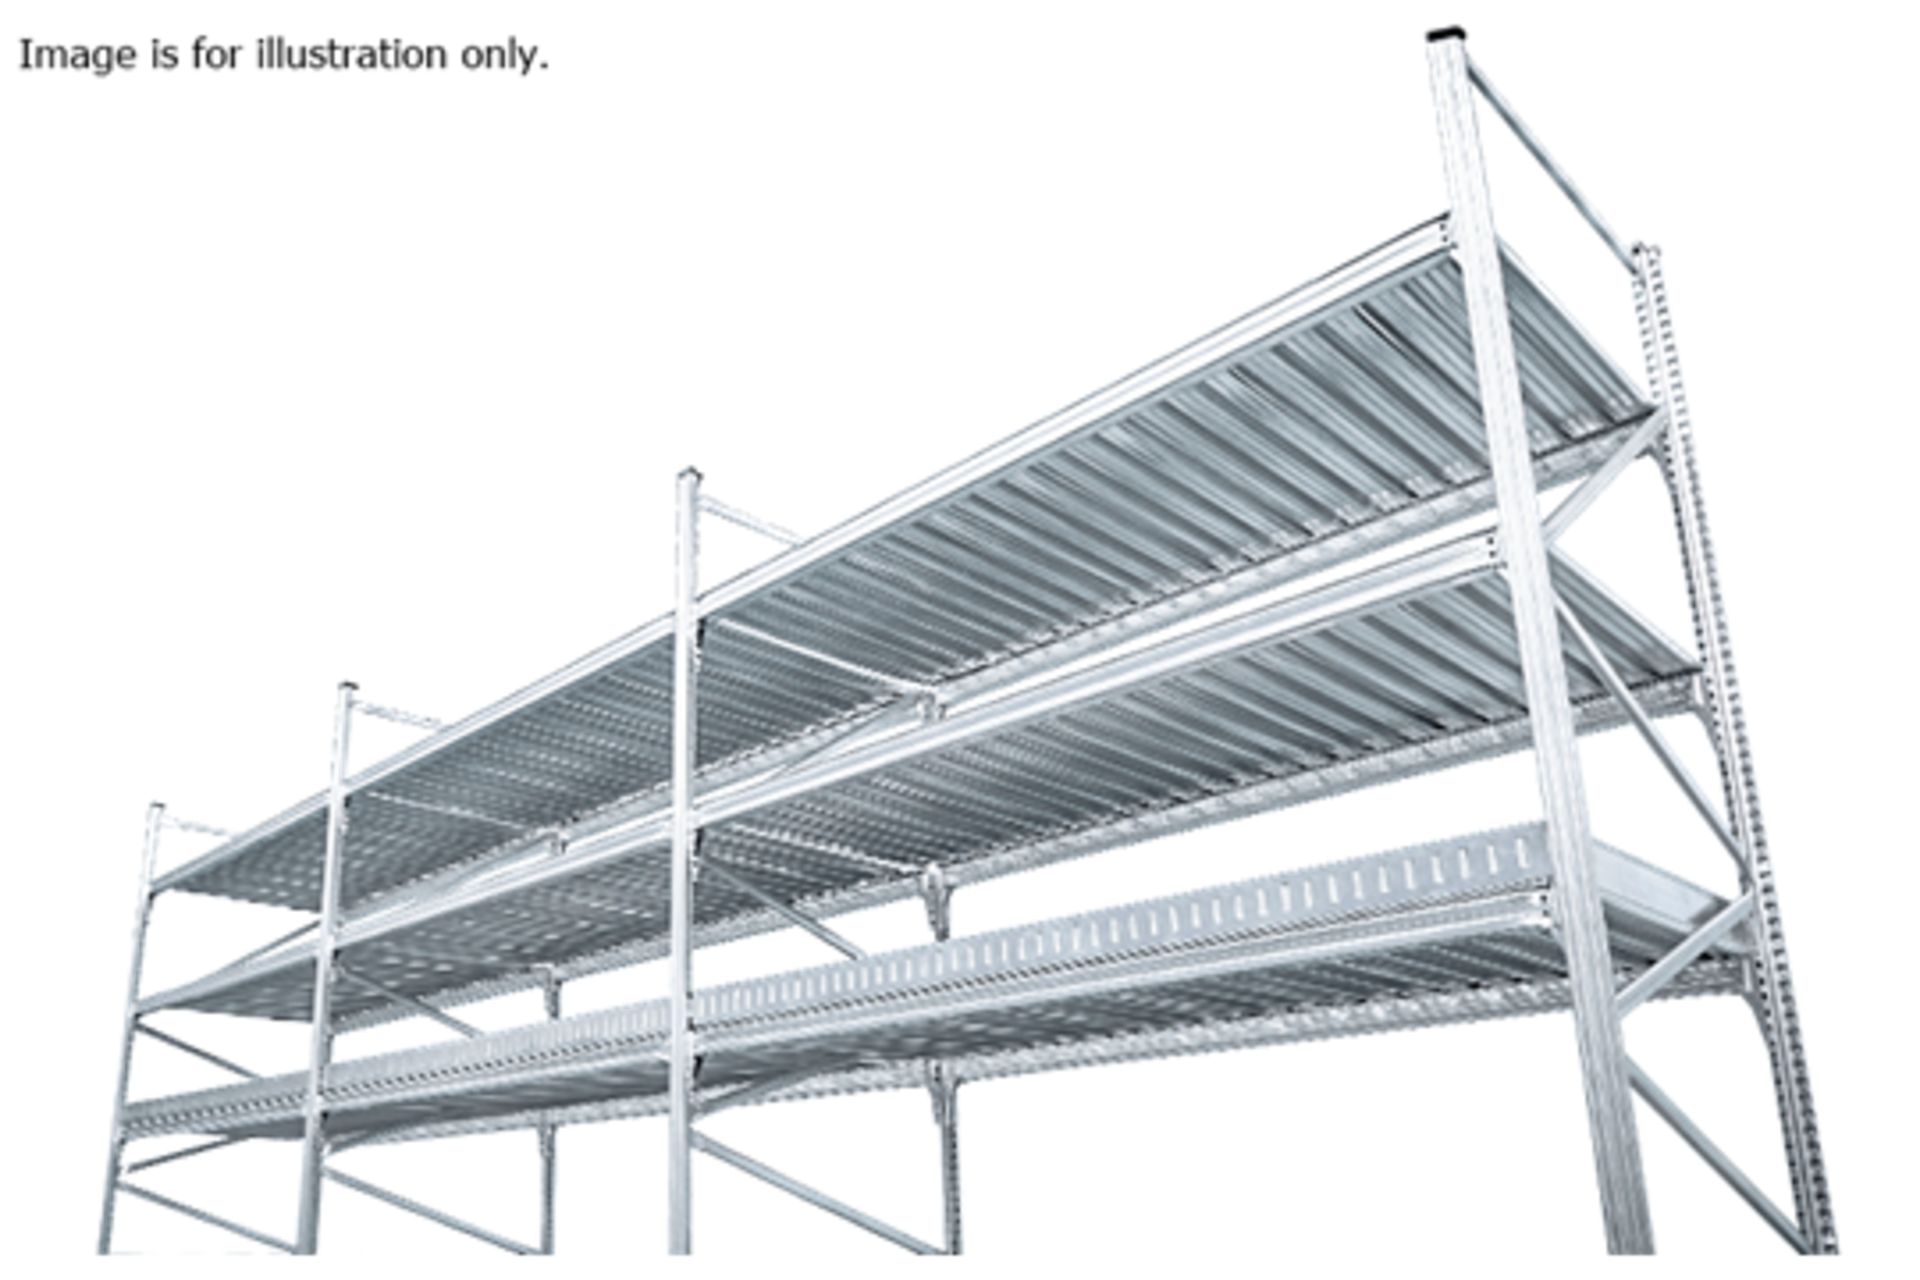 3 x Bays of Metalsistem Steel Modular Storage Shelving - Includes 28 Pieces -  Recently Removed From